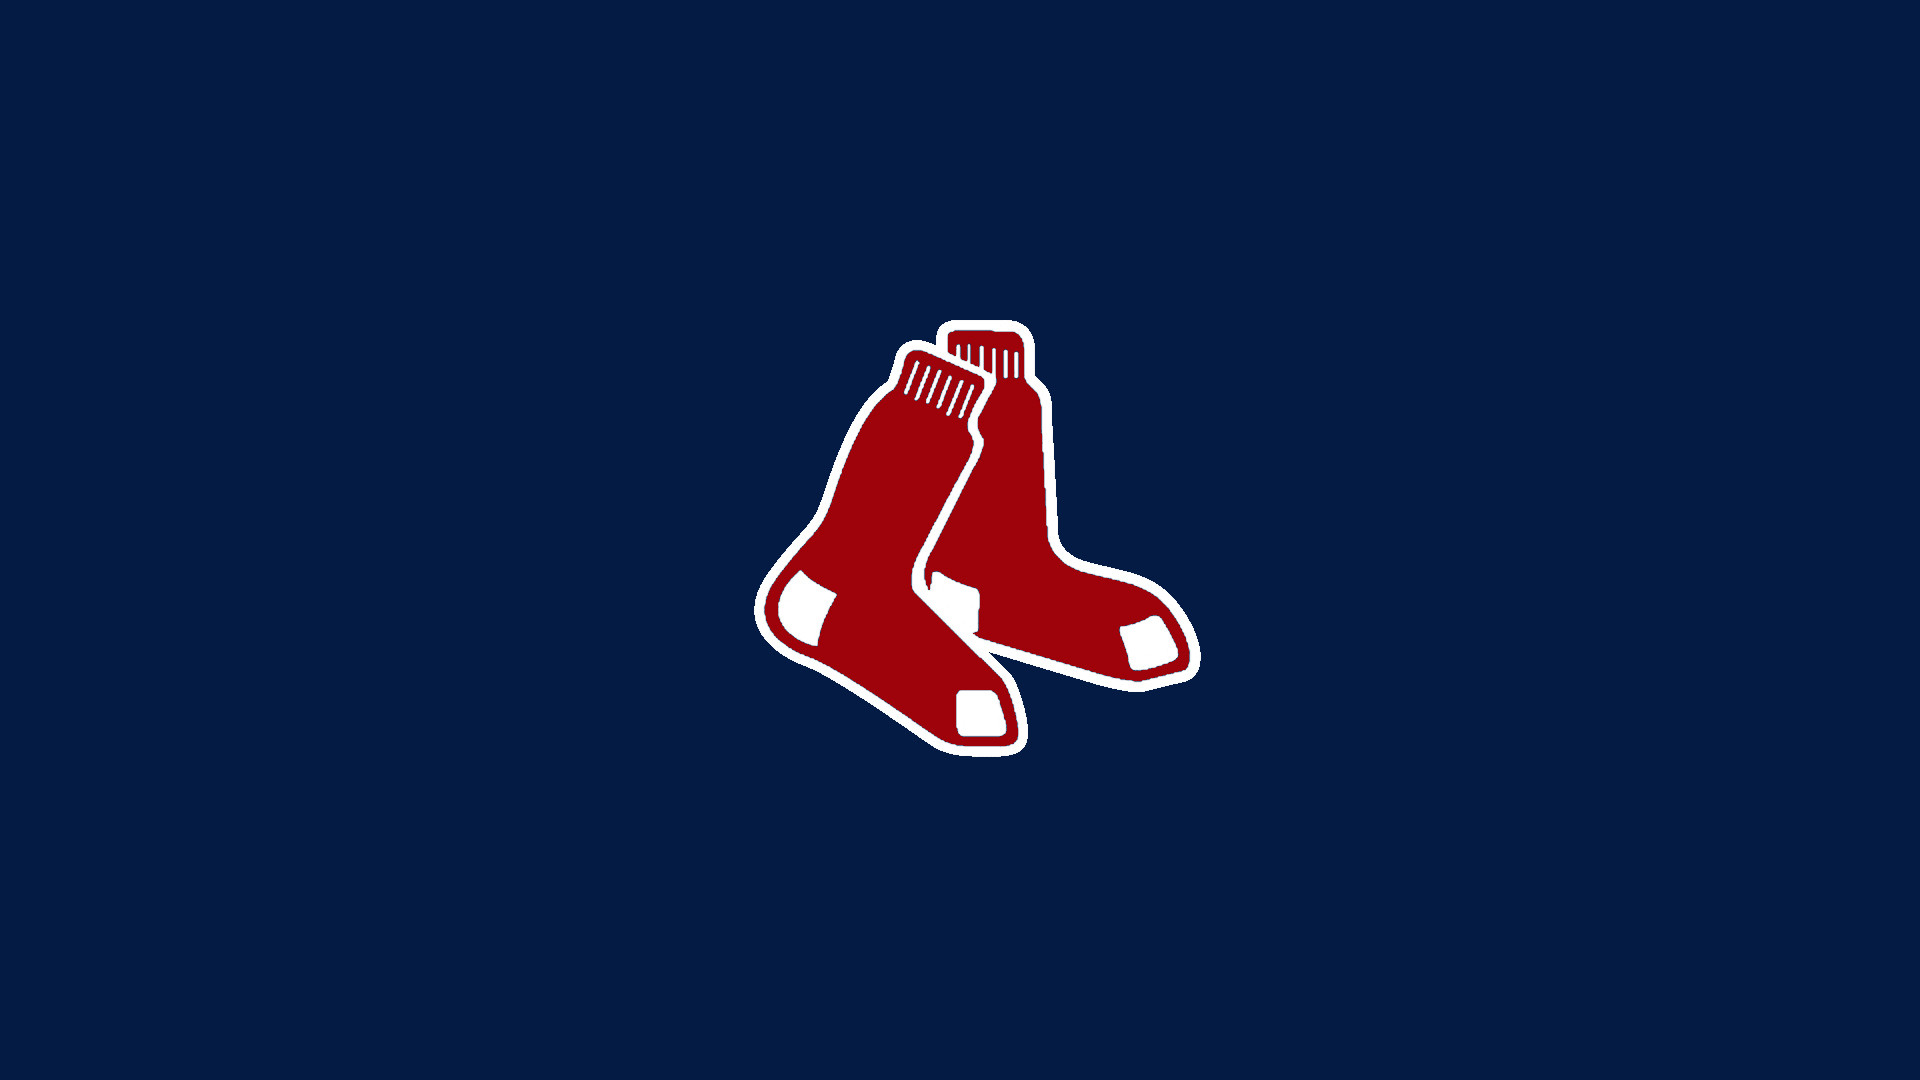 1920x1080 Boston Red Sox images Red Sox Wallpaper  HD wallpaper and  background photos